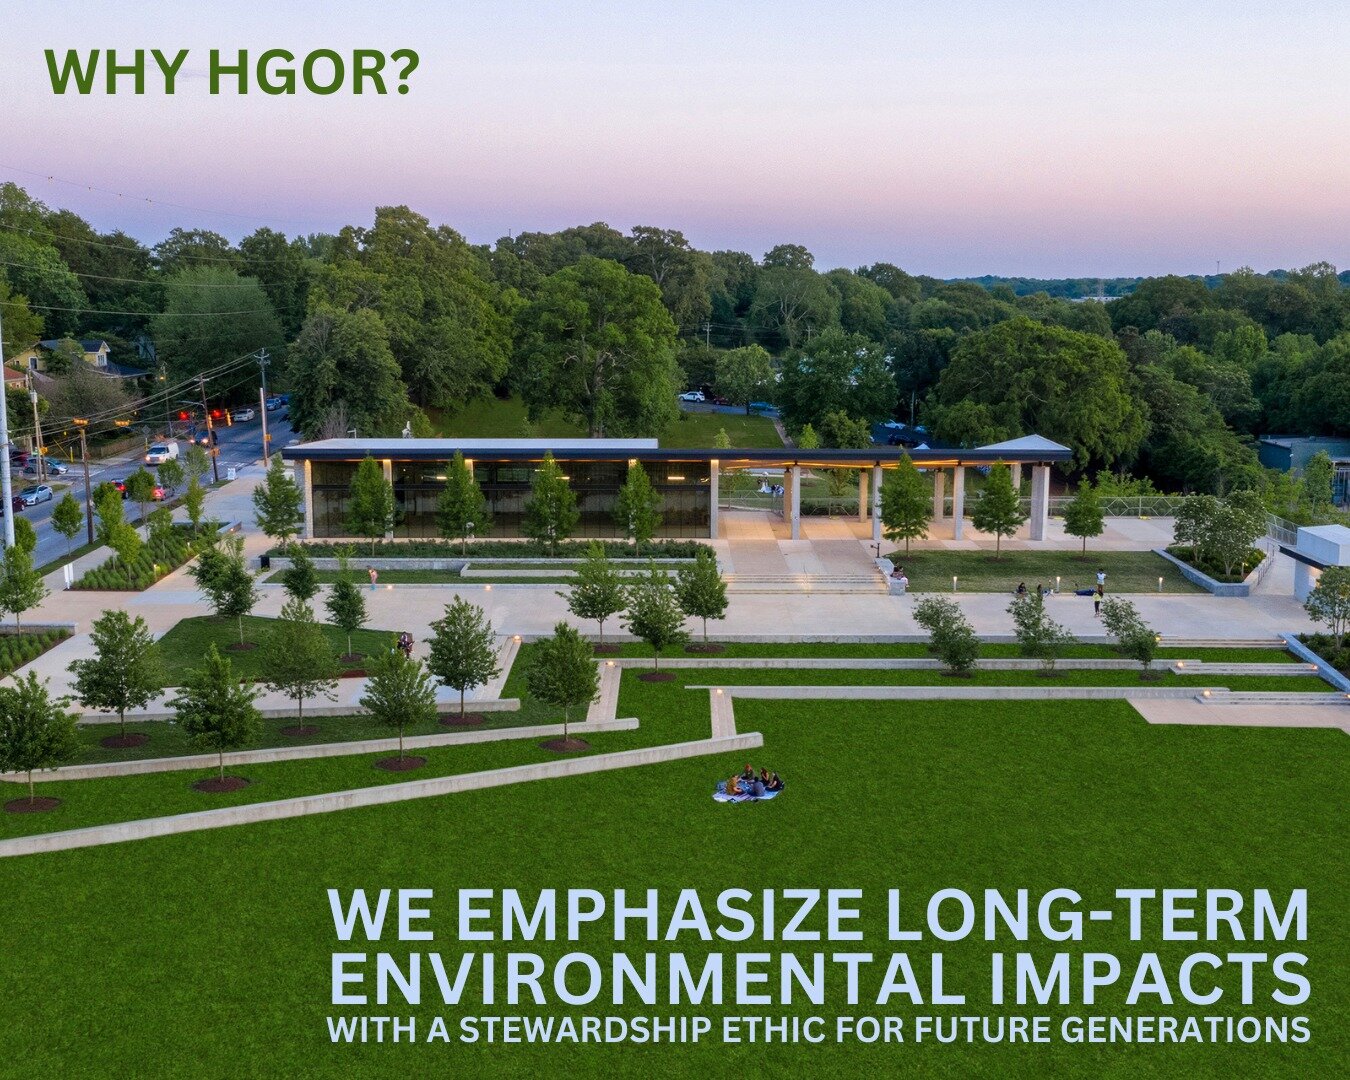 Why HGOR? 

As part of HGOR's stewardship platform for future generations, several pro-bono efforts and environmentally-led projects have allowed the firm to emphasize long-term impacts through integrating green infrastructure and sustainability meth